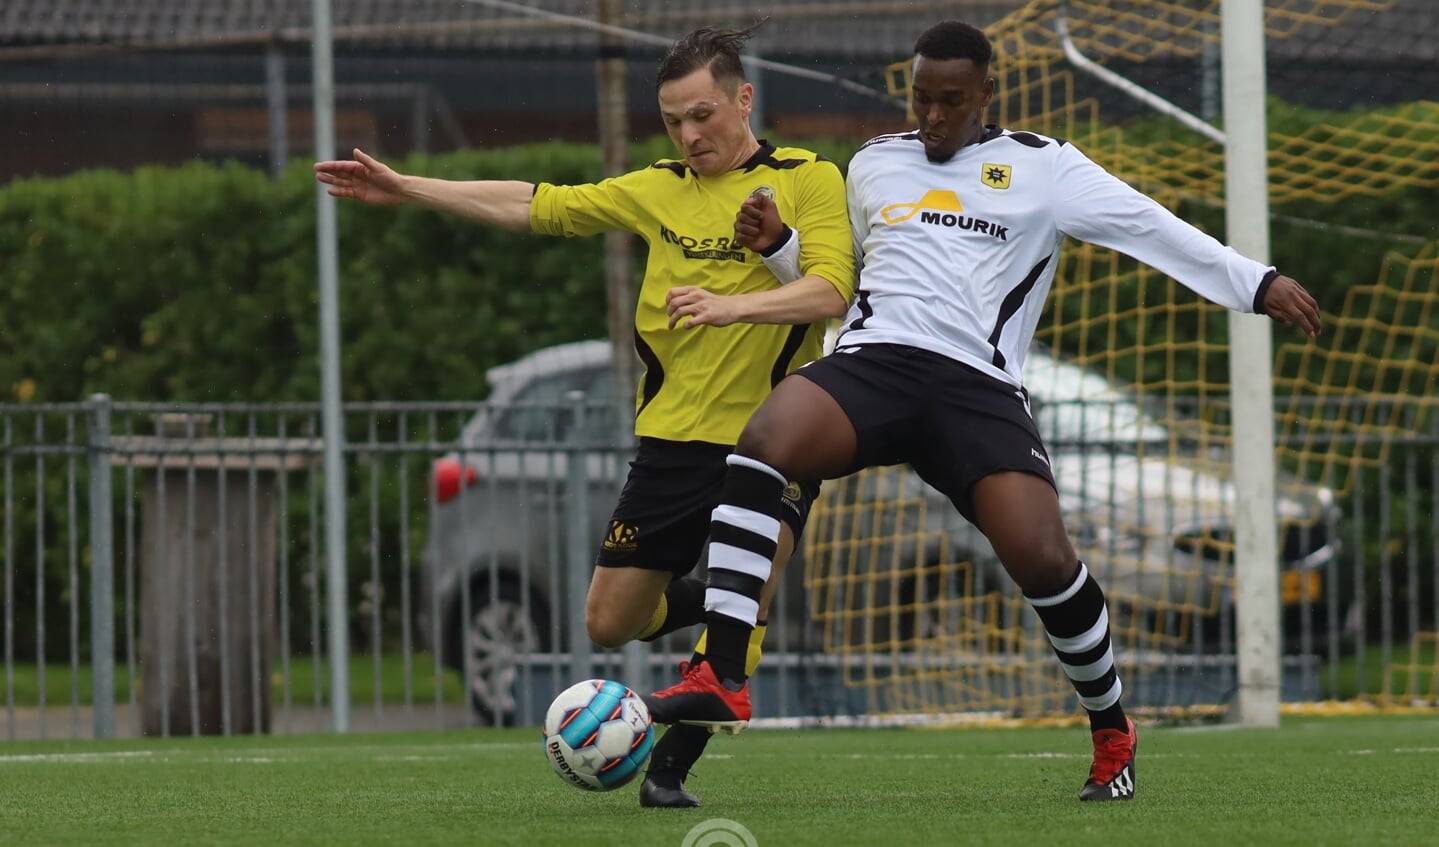 • FC Perkouw - Groot-Ammers (1-1).